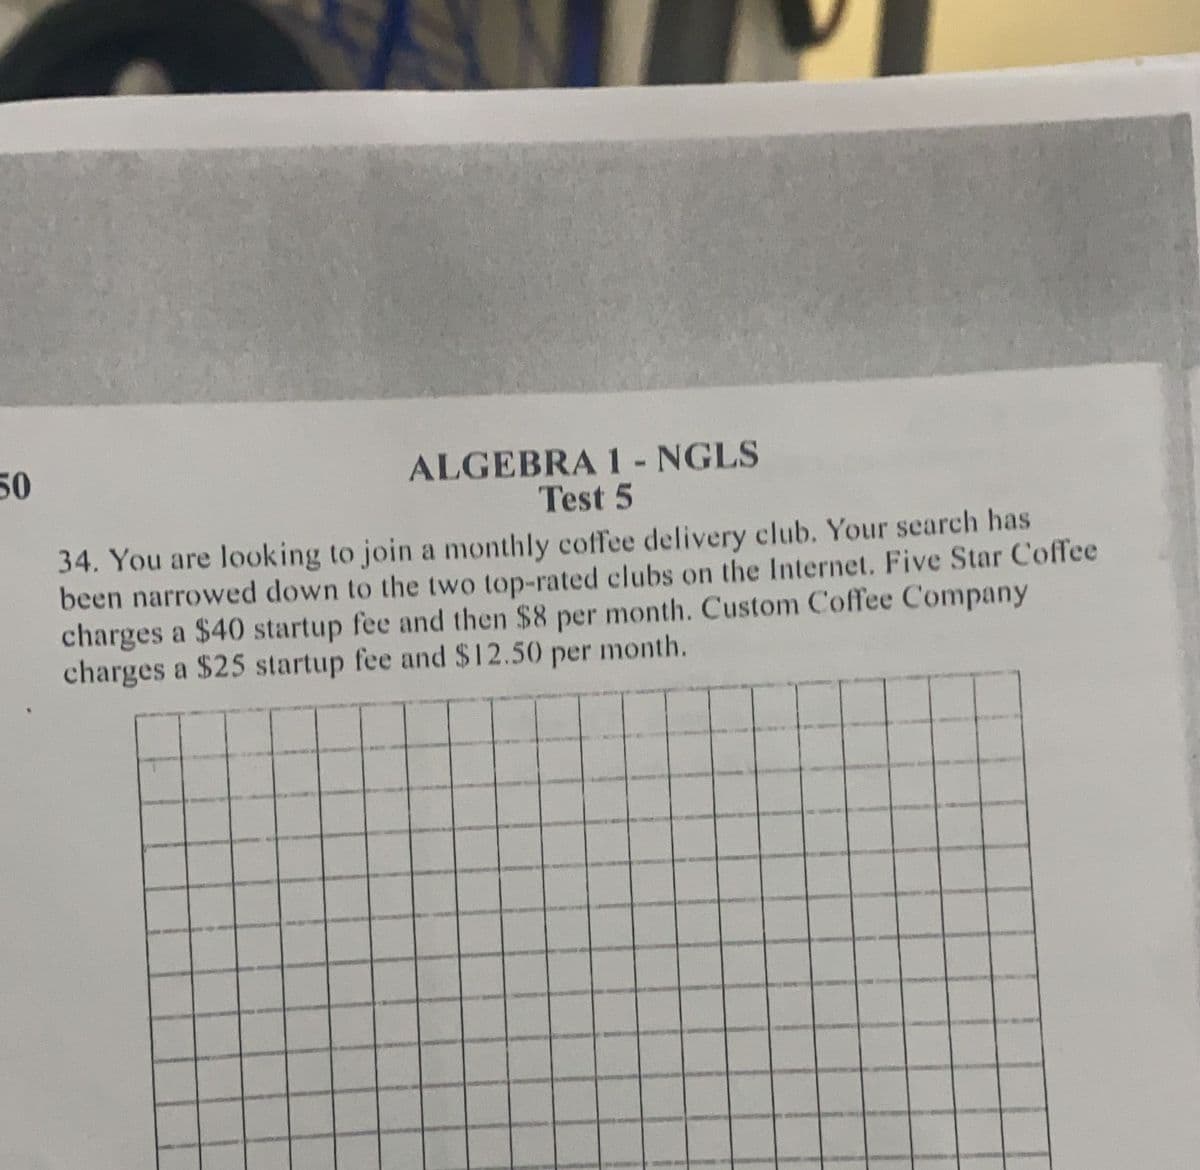 50
ALGEBRA 1 - NGLS
Test 5
34. You are looking to join a monthly coffee delivery club. Your search has
been narrowed down to the two top-rated clubs on the Internet. Five Star Coffee
charges a $40 startup fee and then $8 per month. Custom Coffee Company
charges a $25 startup fee and $12.50 per month.